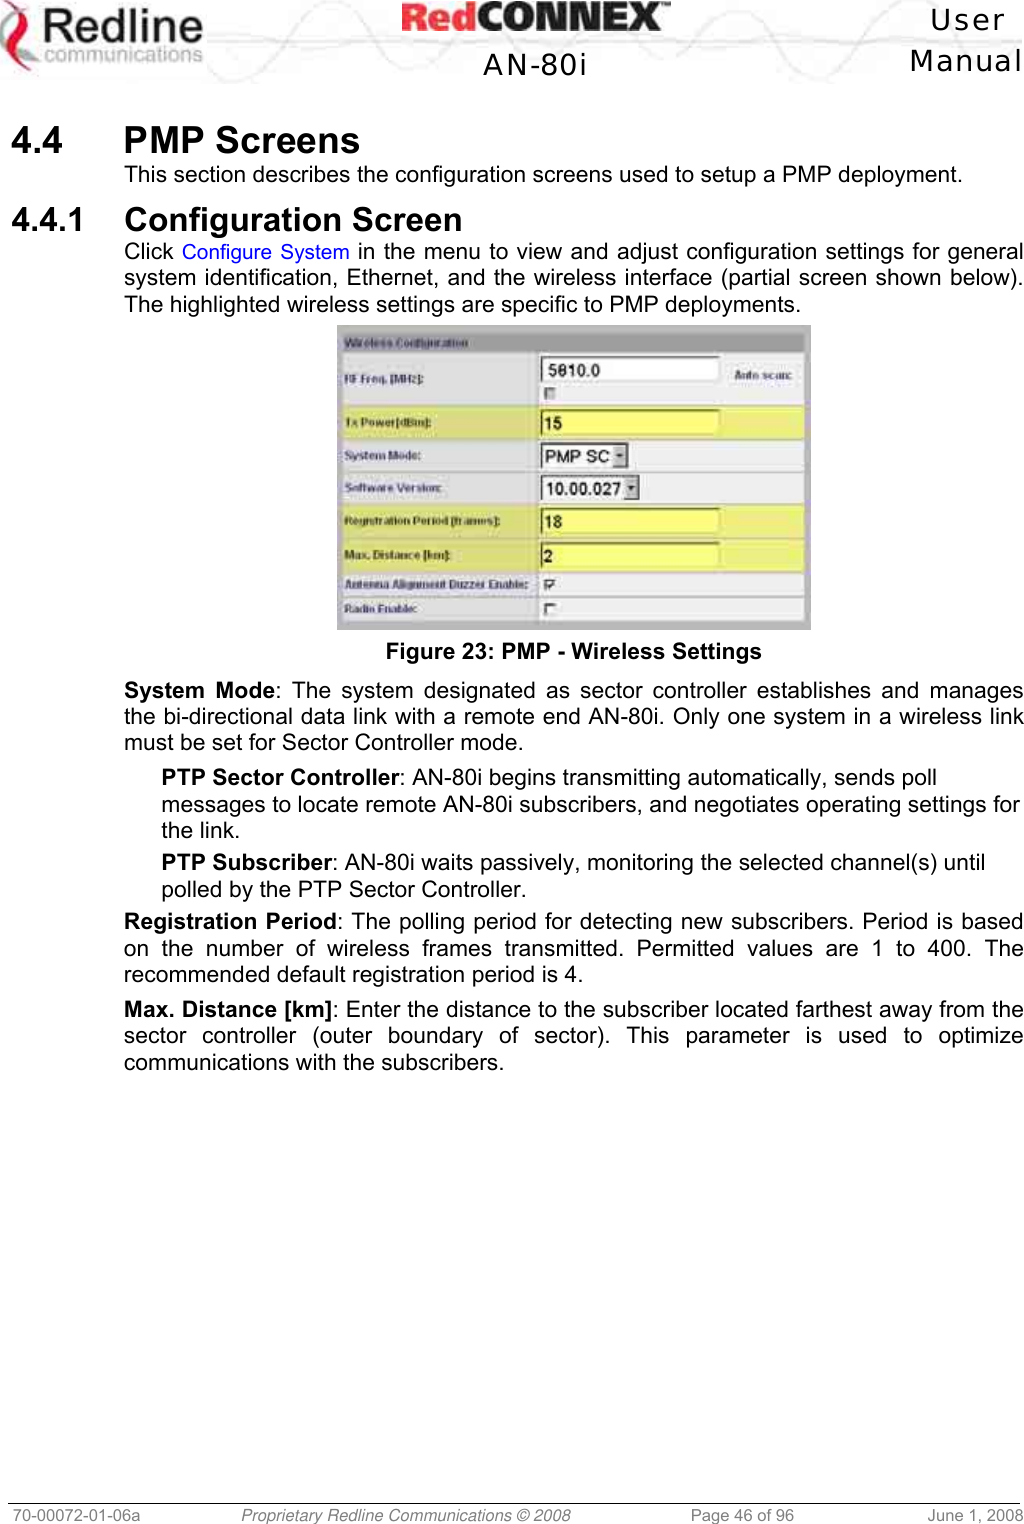   User  AN-80i Manual  70-00072-01-06a  Proprietary Redline Communications © 2008  Page 46 of 96  June 1, 2008  4.4 PMP Screens This section describes the configuration screens used to setup a PMP deployment. 4.4.1 Configuration Screen Click Configure System in the menu to view and adjust configuration settings for general system identification, Ethernet, and the wireless interface (partial screen shown below). The highlighted wireless settings are specific to PMP deployments.  Figure 23: PMP - Wireless Settings System Mode: The system designated as sector controller establishes and manages the bi-directional data link with a remote end AN-80i. Only one system in a wireless link must be set for Sector Controller mode. PTP Sector Controller: AN-80i begins transmitting automatically, sends poll messages to locate remote AN-80i subscribers, and negotiates operating settings for the link. PTP Subscriber: AN-80i waits passively, monitoring the selected channel(s) until polled by the PTP Sector Controller. Registration Period: The polling period for detecting new subscribers. Period is based on the number of wireless frames transmitted. Permitted values are 1 to 400. The recommended default registration period is 4. Max. Distance [km]: Enter the distance to the subscriber located farthest away from the sector controller (outer boundary of sector). This parameter is used to optimize communications with the subscribers. 